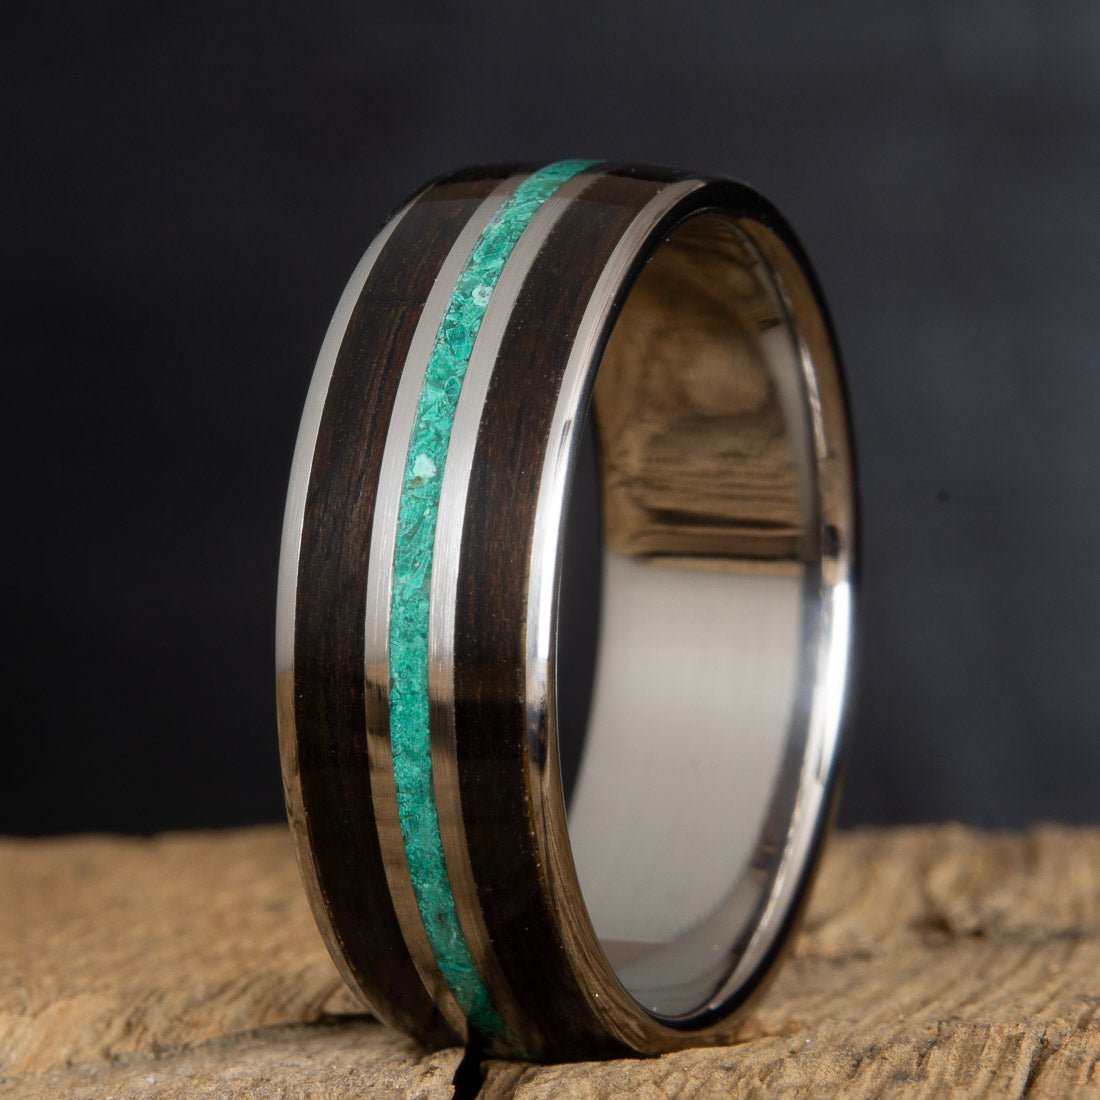 Mens wood ring with ebony wood and malachite inlays